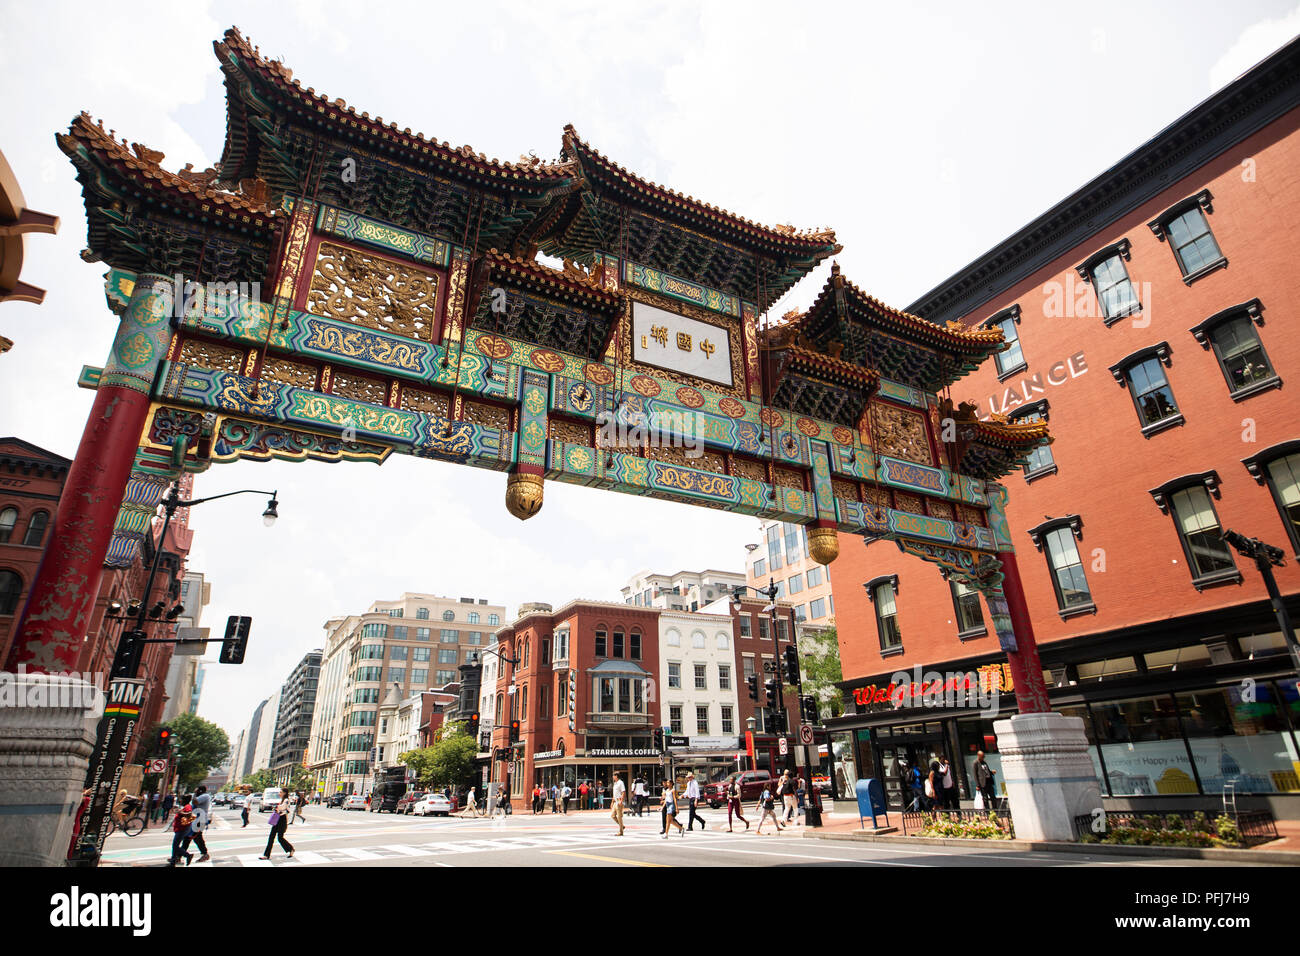 The Friendship Archway (or Gate) in Washington DC's Chinatown, at 7th Street NW. Stock Photo